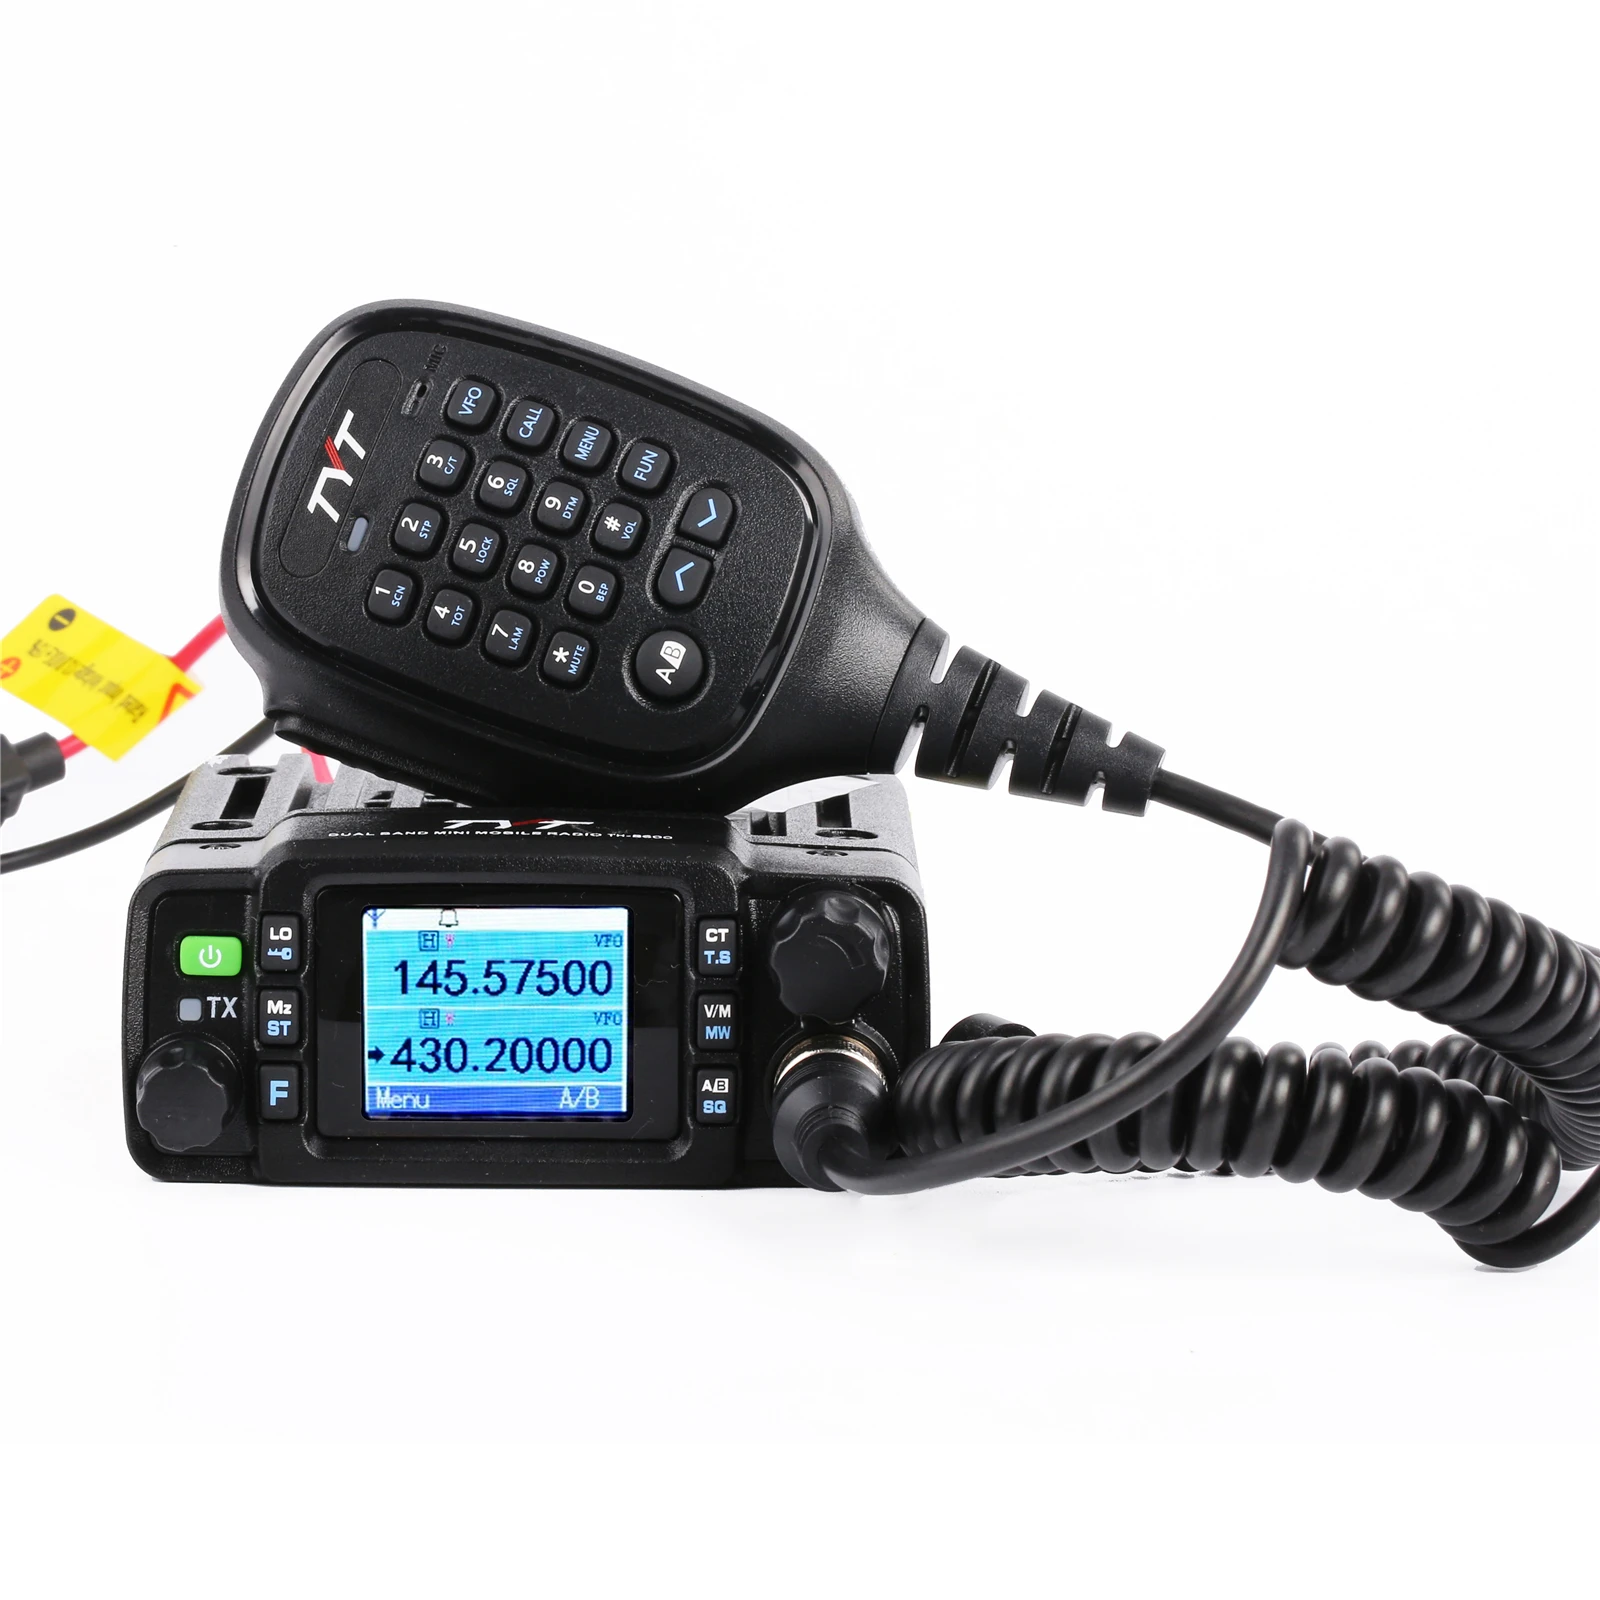 

TYT TH-8600 IP67 Waterproof Mobile Radio Dual Band Professional Walkie Talkie 25W VHF/UHF Compact Radio with USB Cable In Stock